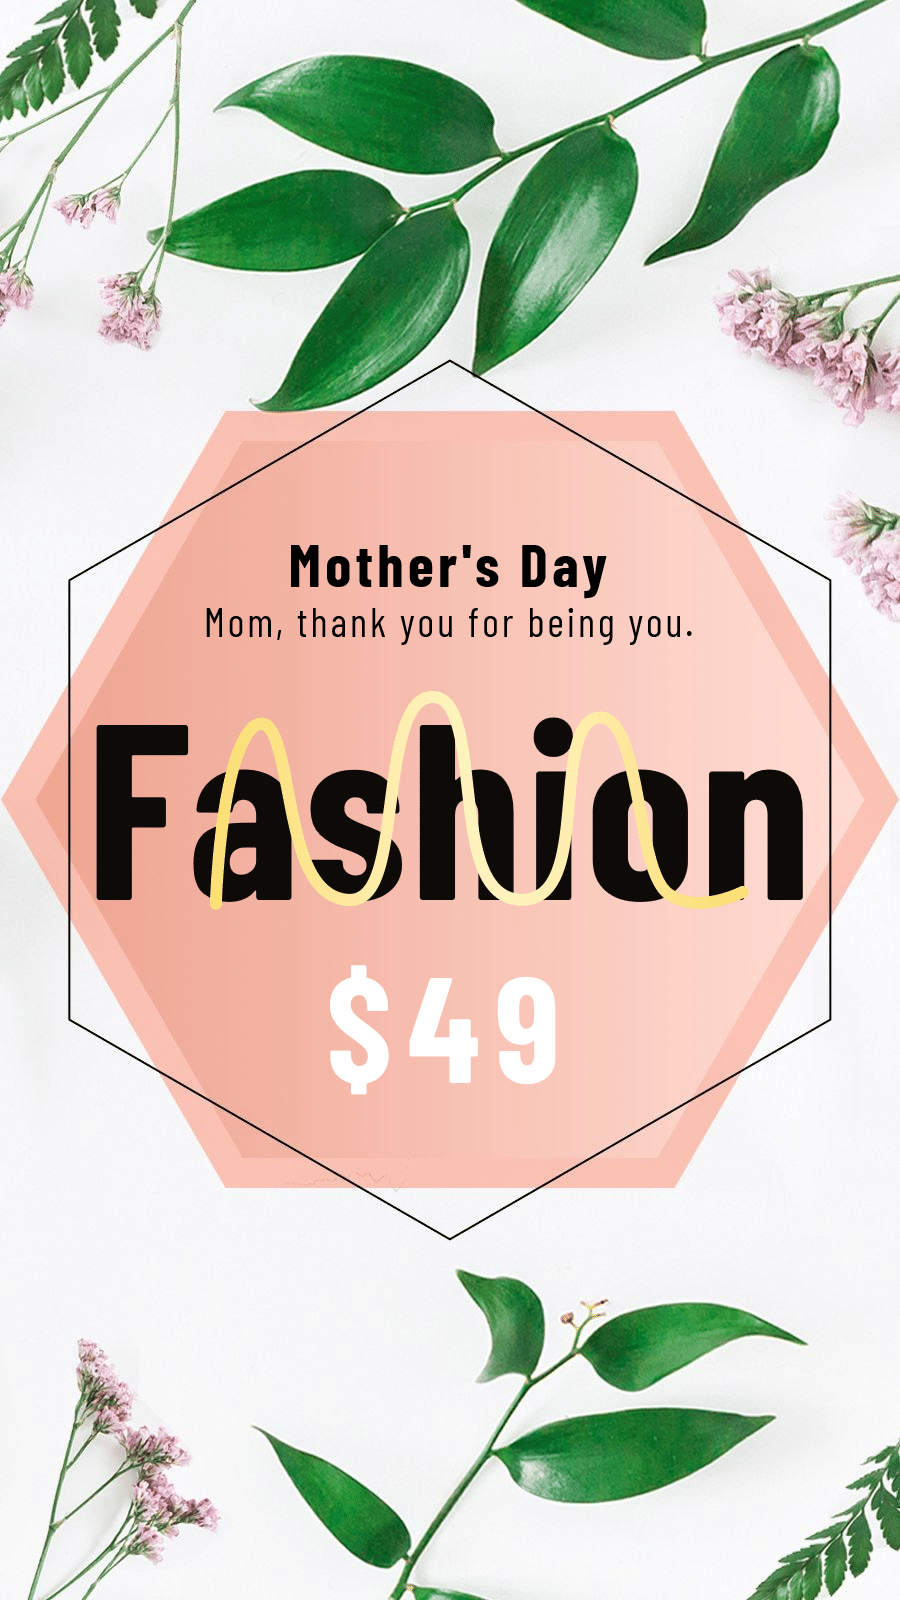 Green Leaf Simple Fresh Mother's Day Clothes Promo Instagram Story预览效果